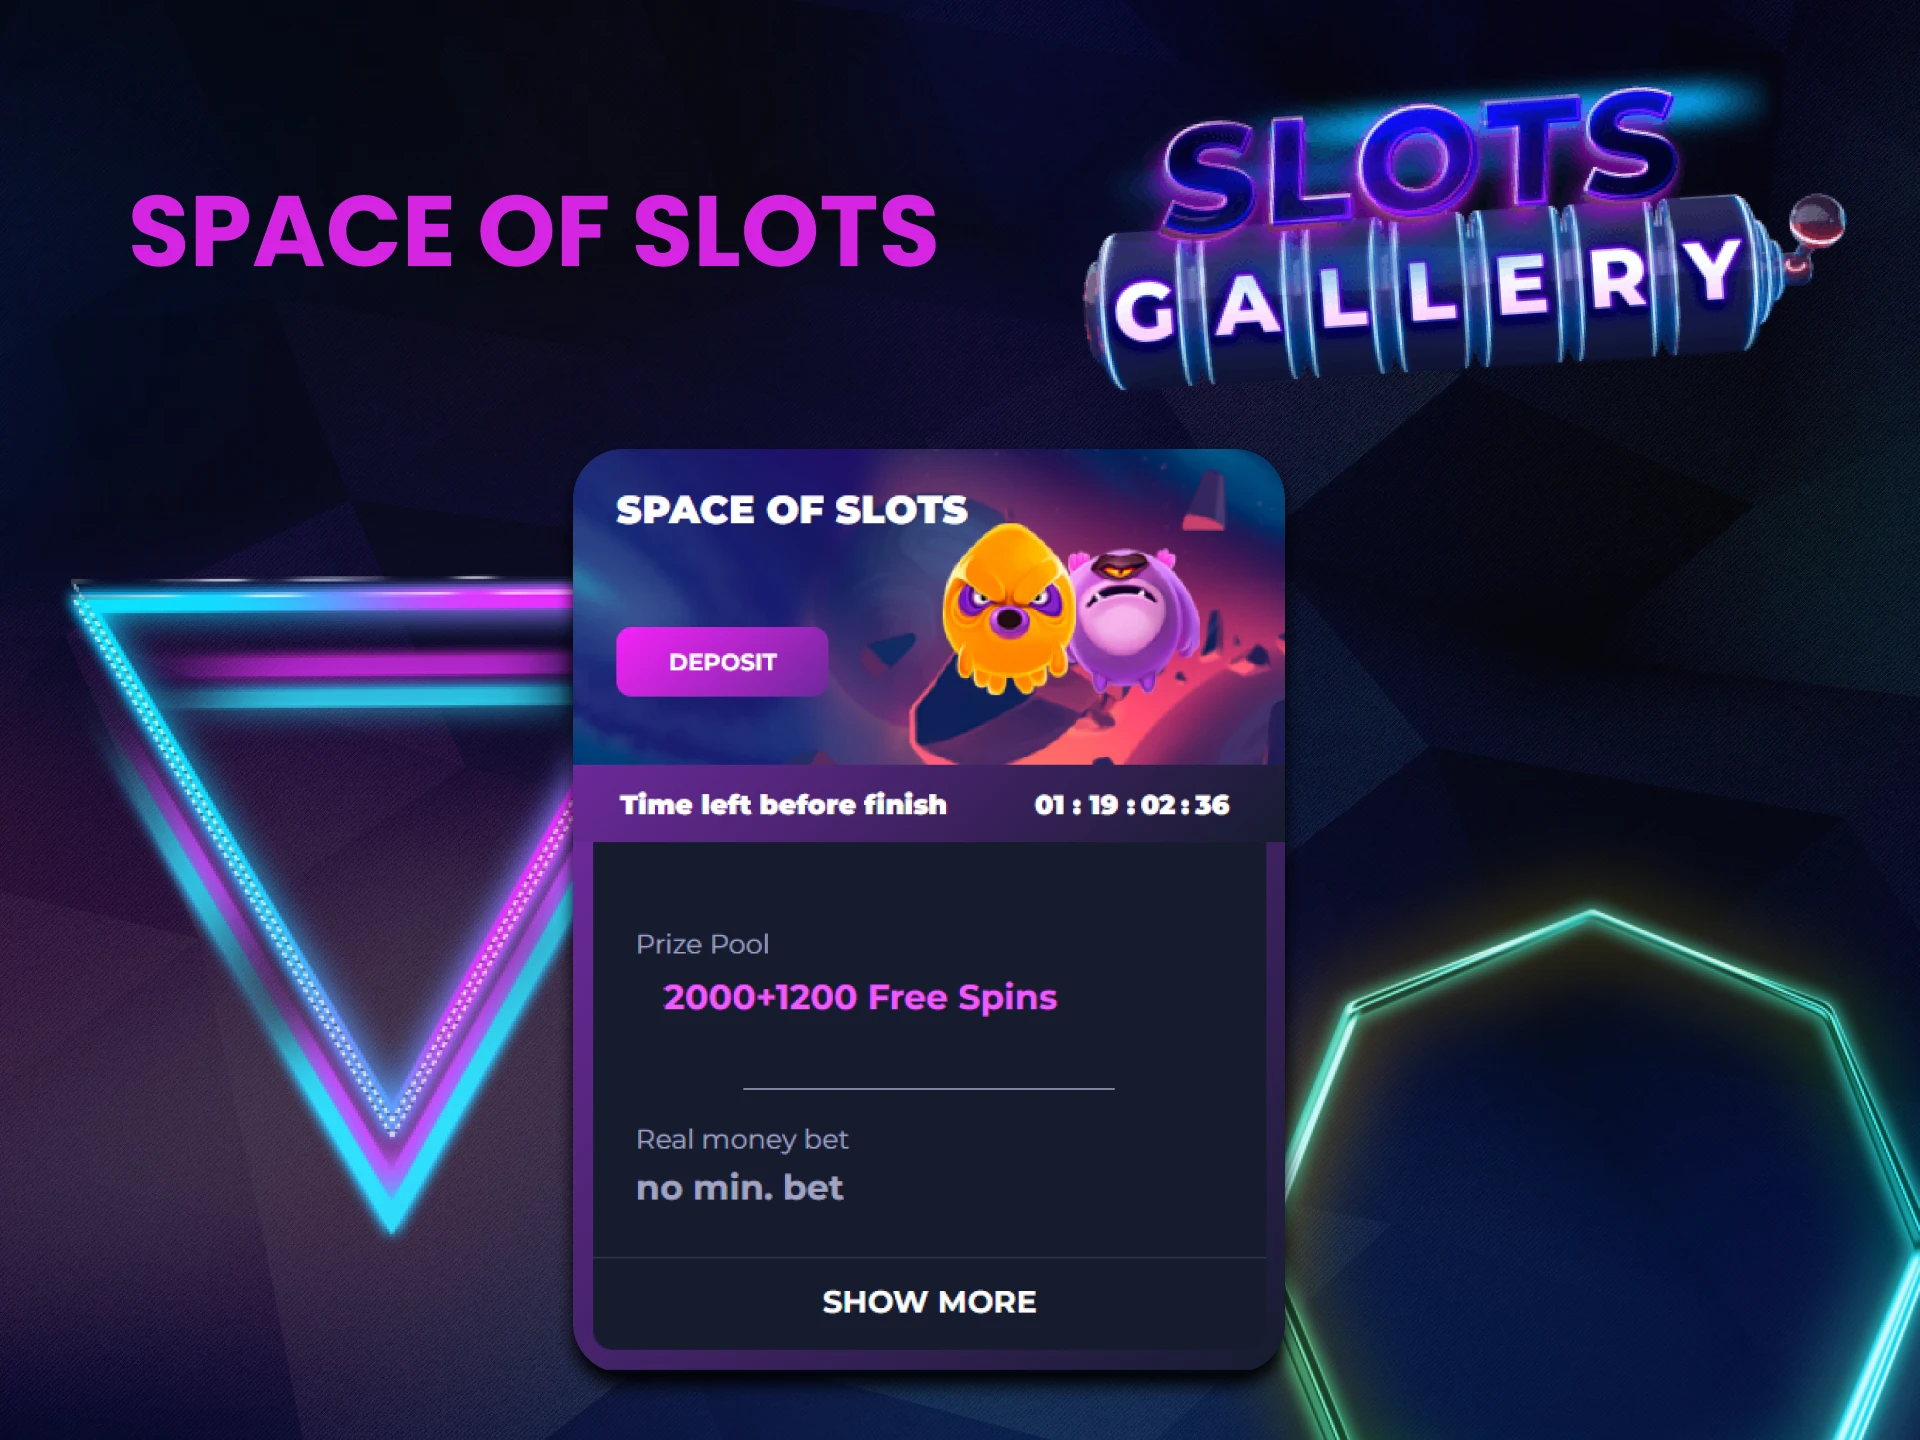 Take part in the Space of Slots tournament from Slots Gallery.